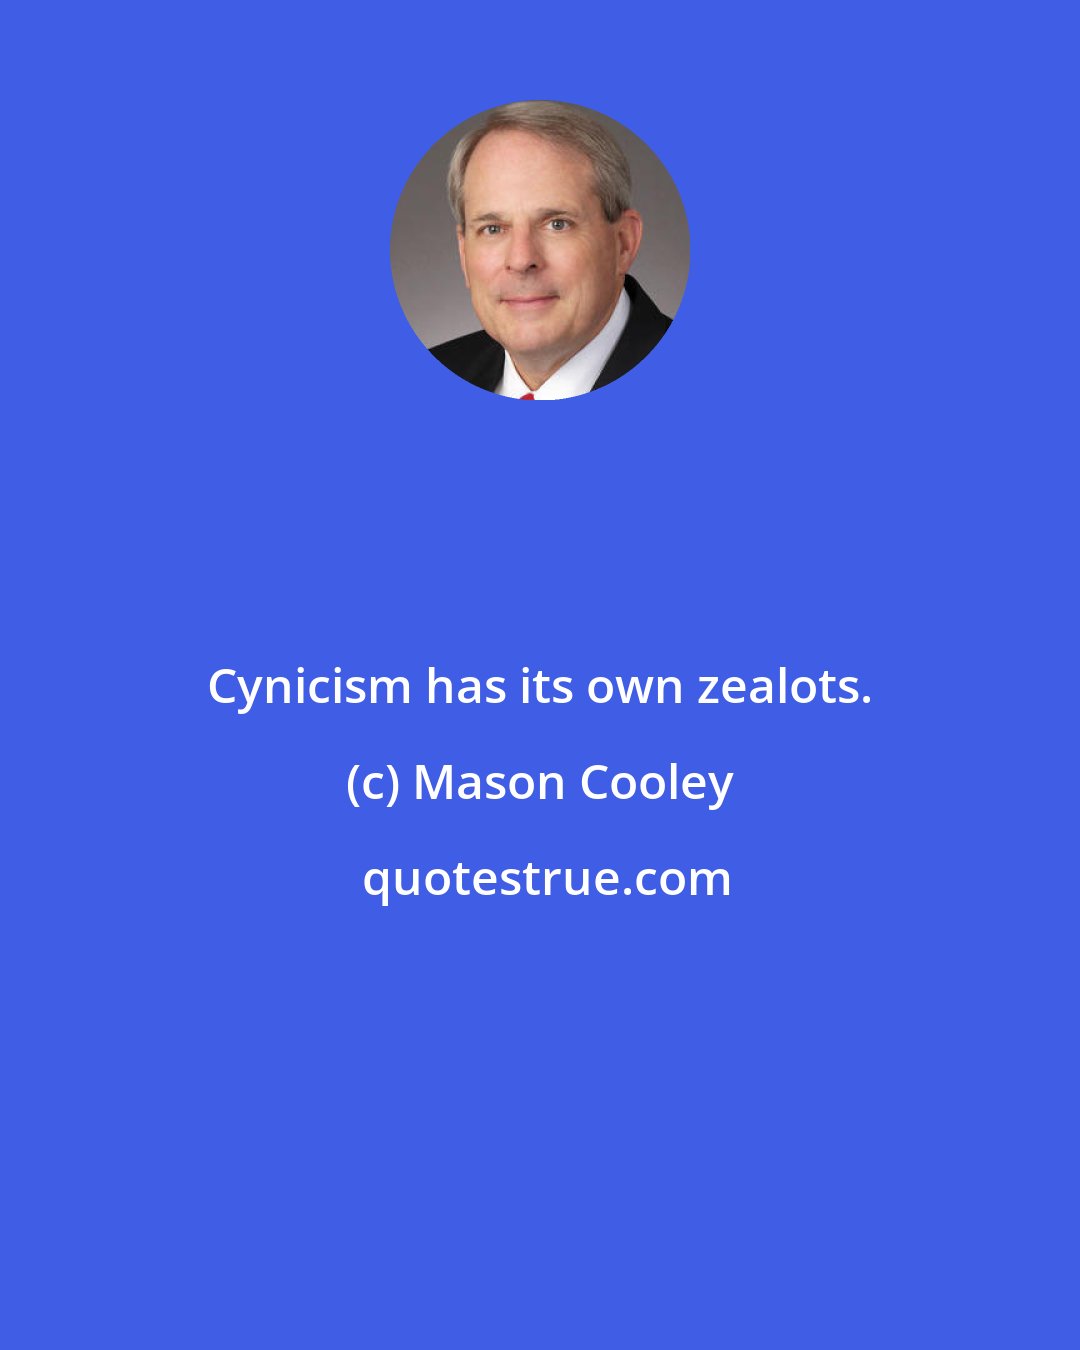 Mason Cooley: Cynicism has its own zealots.